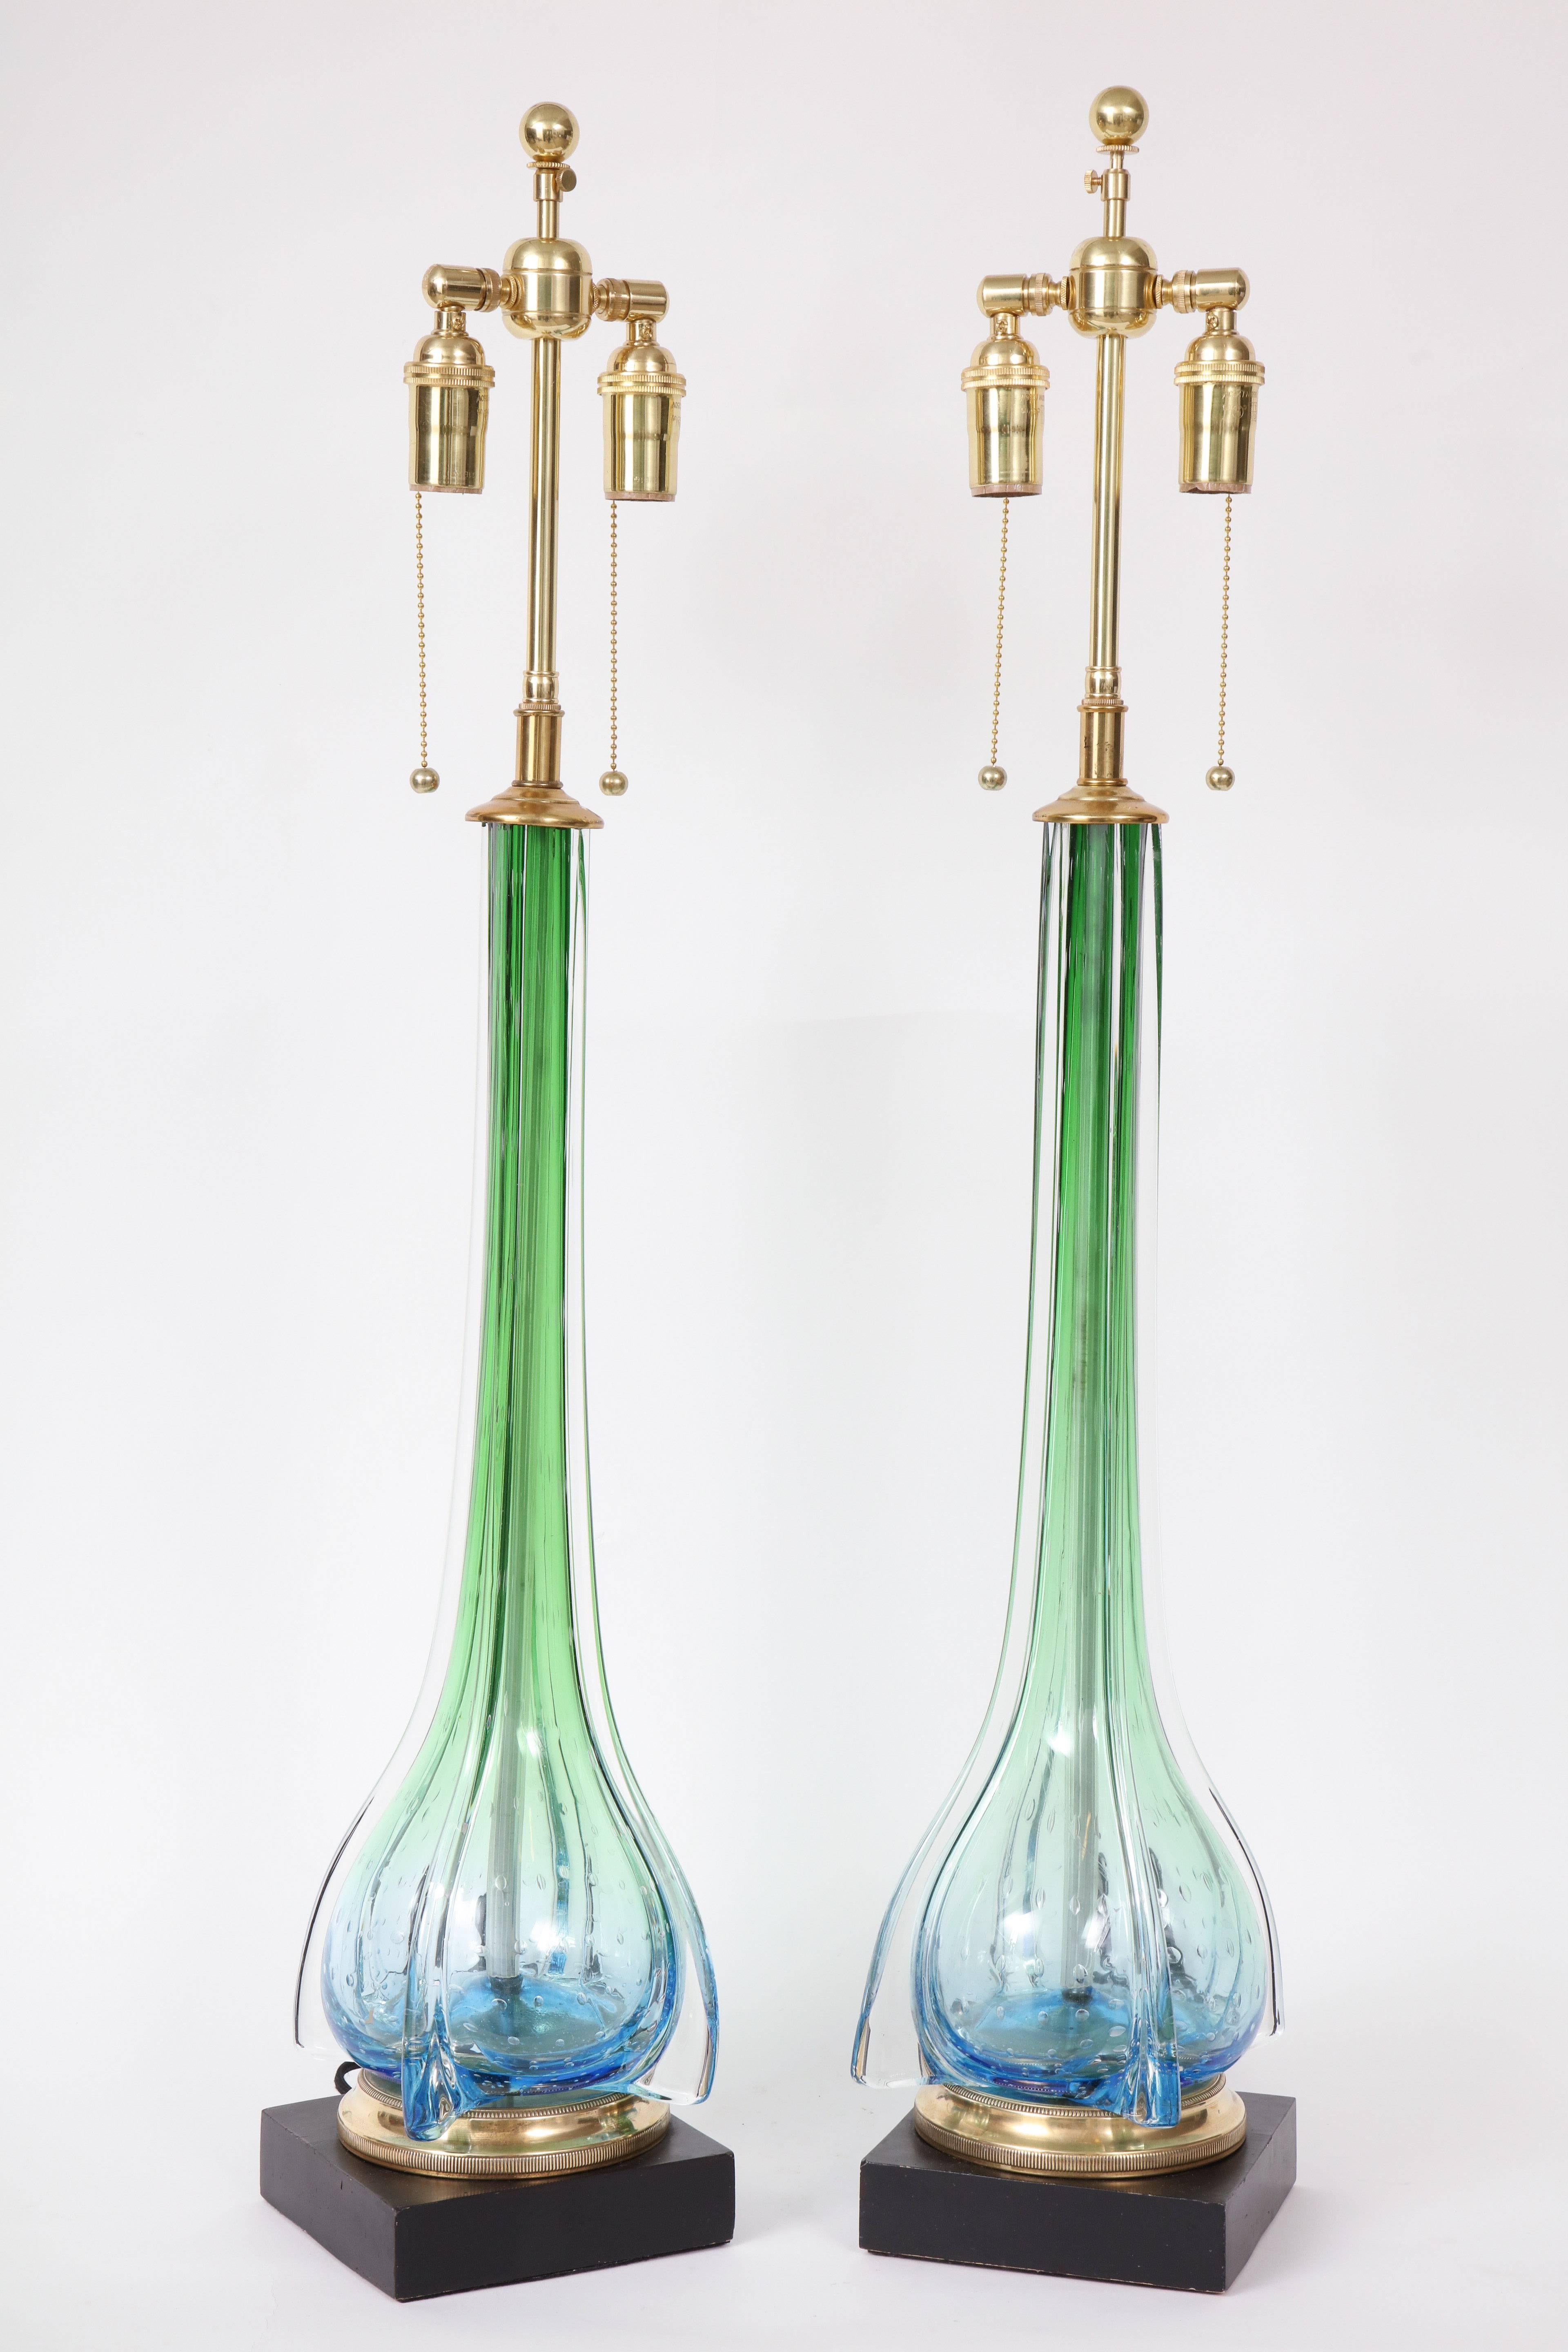 Beautiful pair of Murano lamps by Seguso.
These handblown glass lamp bodies are in exquisite shades of Green and blue.
They have controlled bubbles towards the bottom where the base is mounted onto a polished brass base which sits on top of a